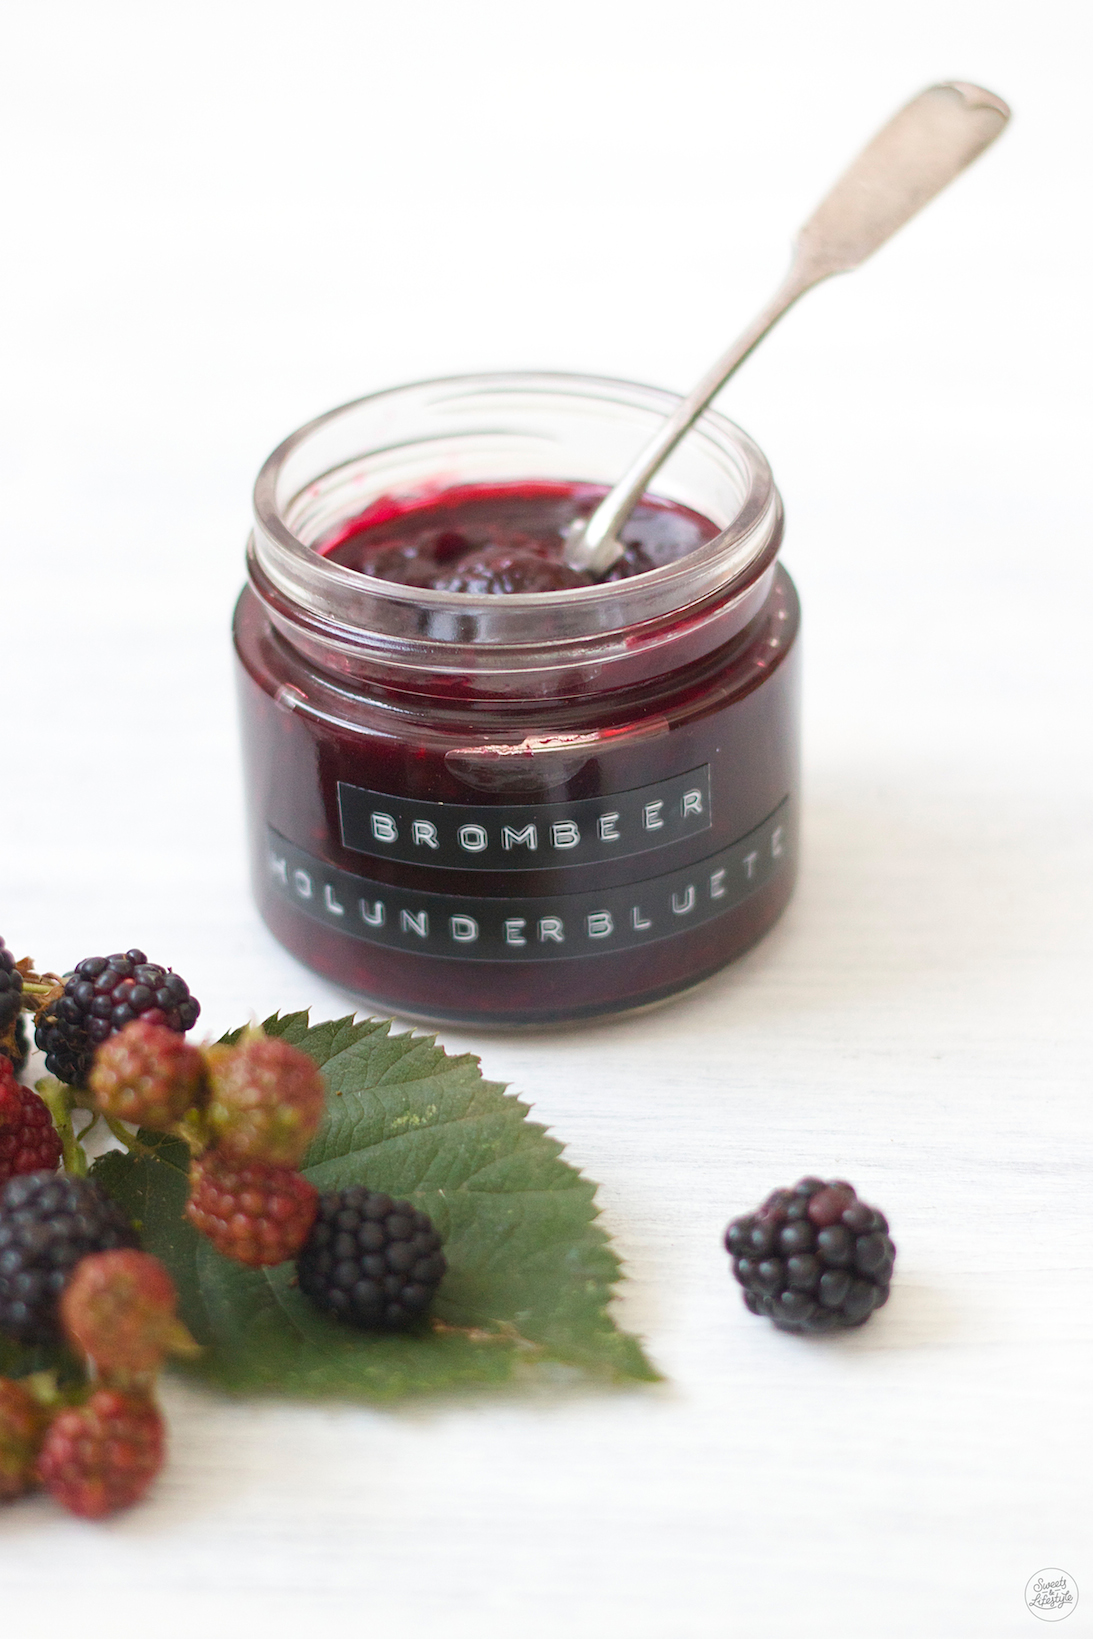 Brombeer Holunderblüten Marmelade - Sweets and Lifestyle